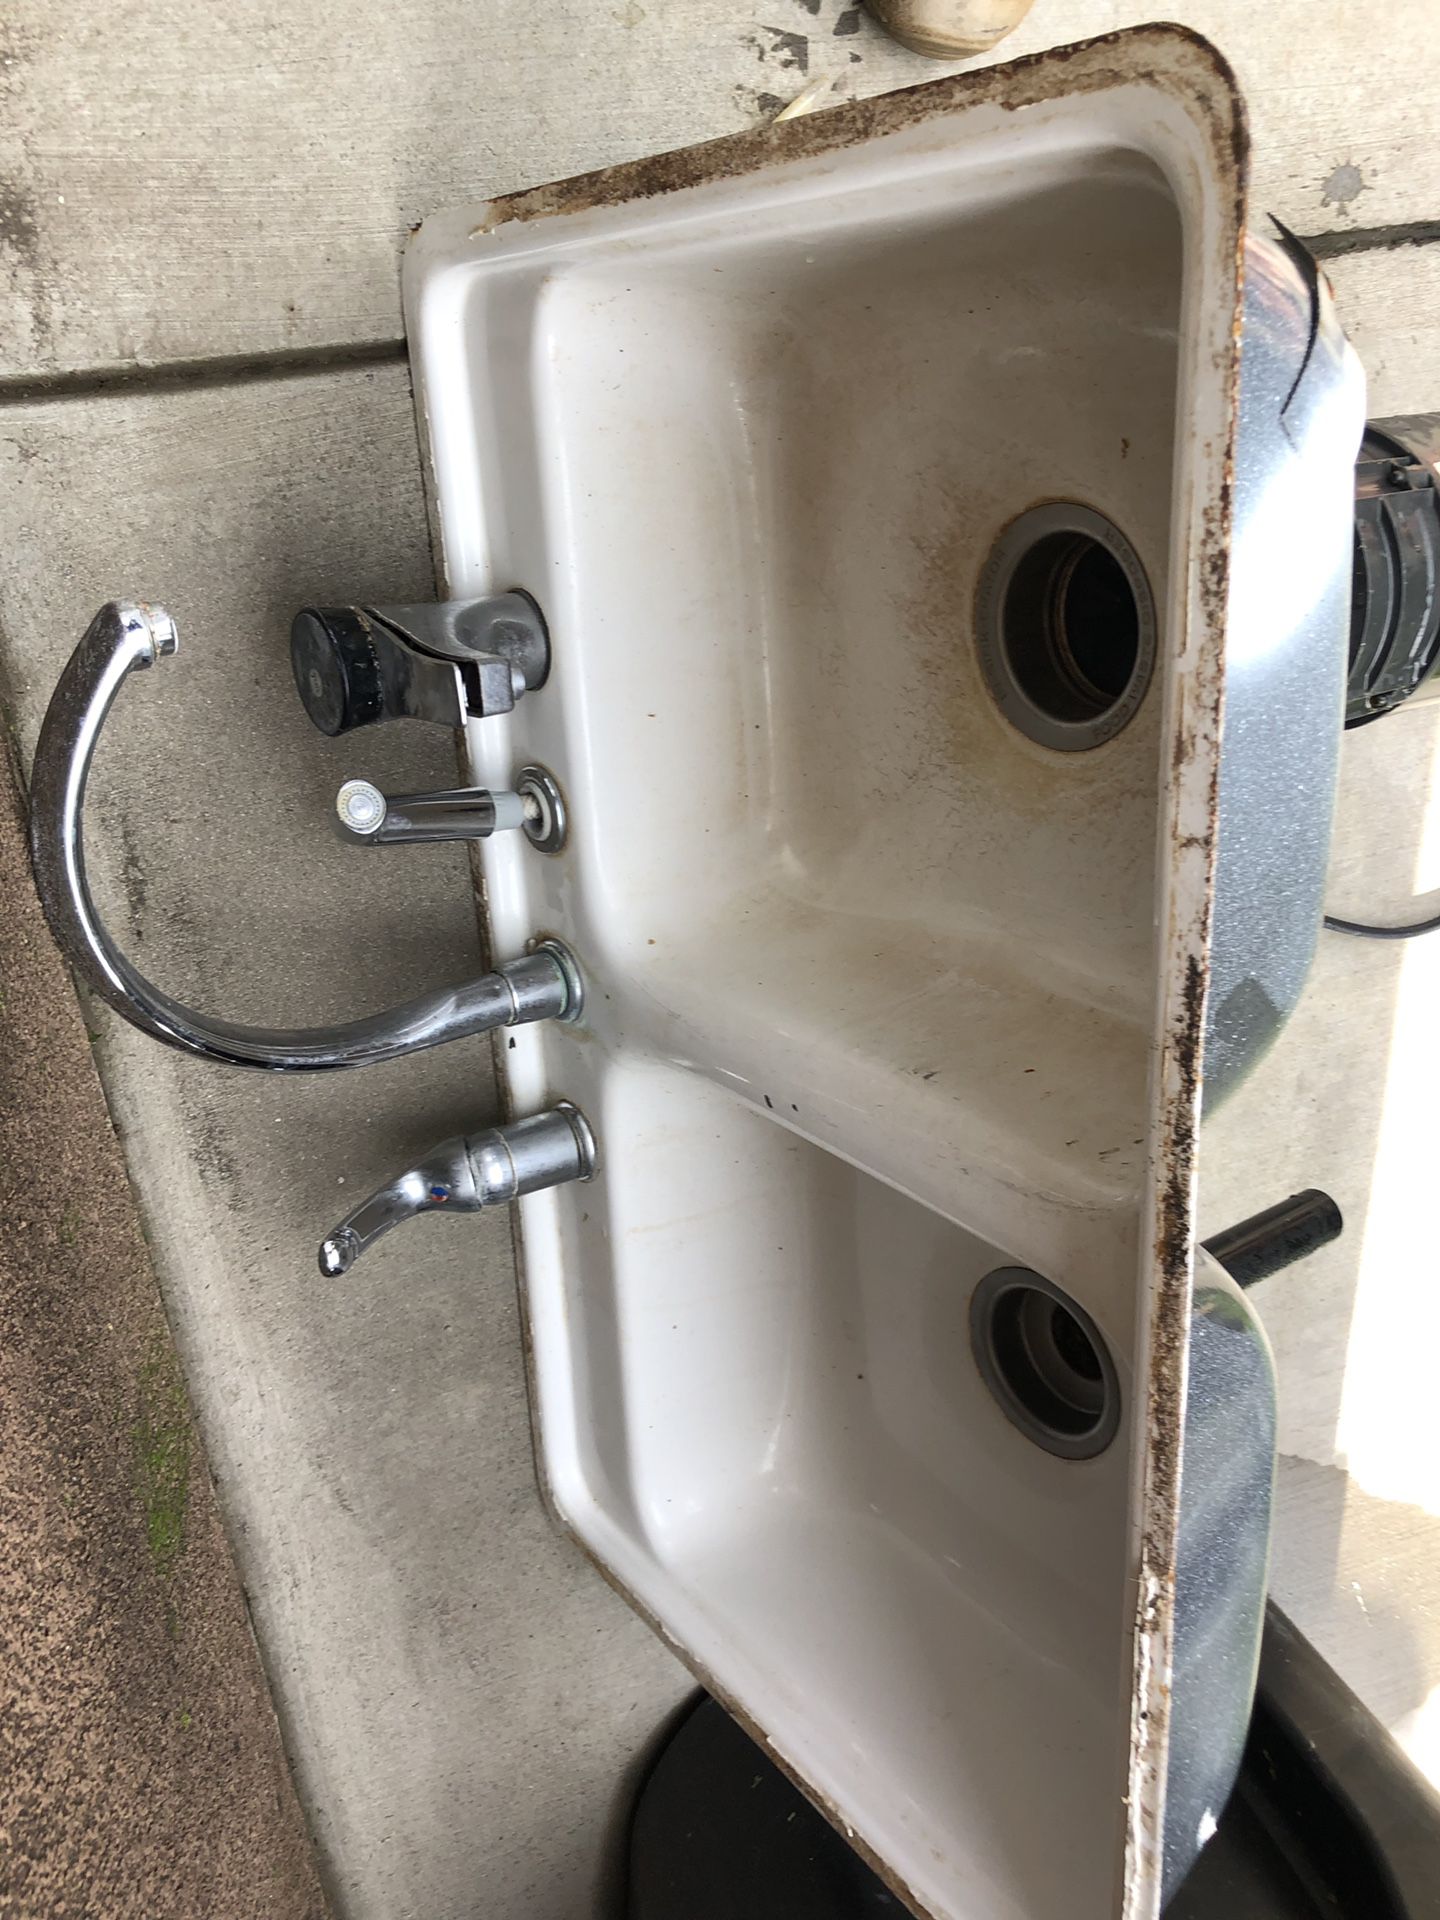 FREE USED KITCHEN SINK IN GOOD WORKING CONDITION